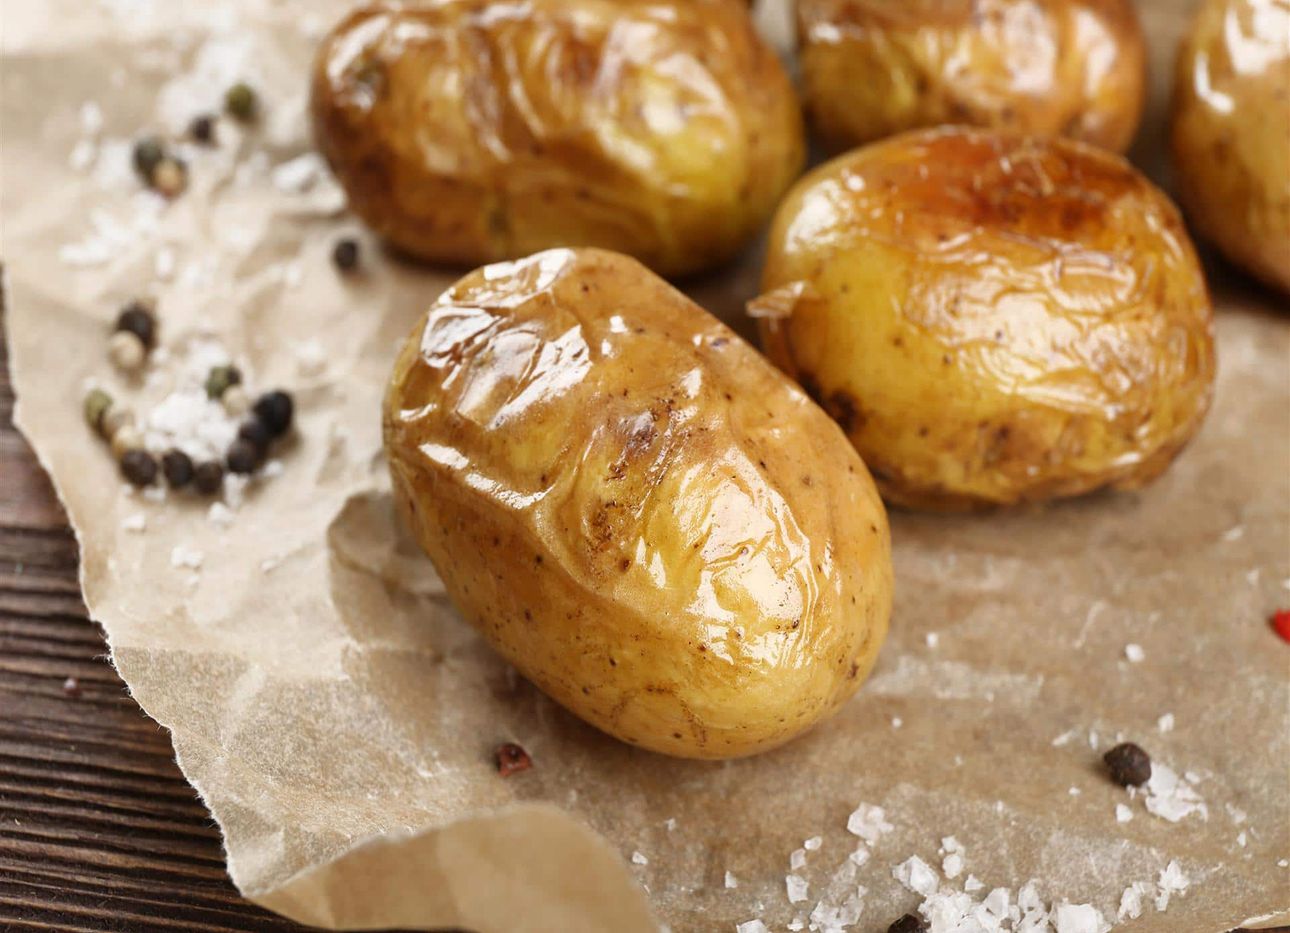 Baked potatoes sitting on wax paper with salt and pepper.